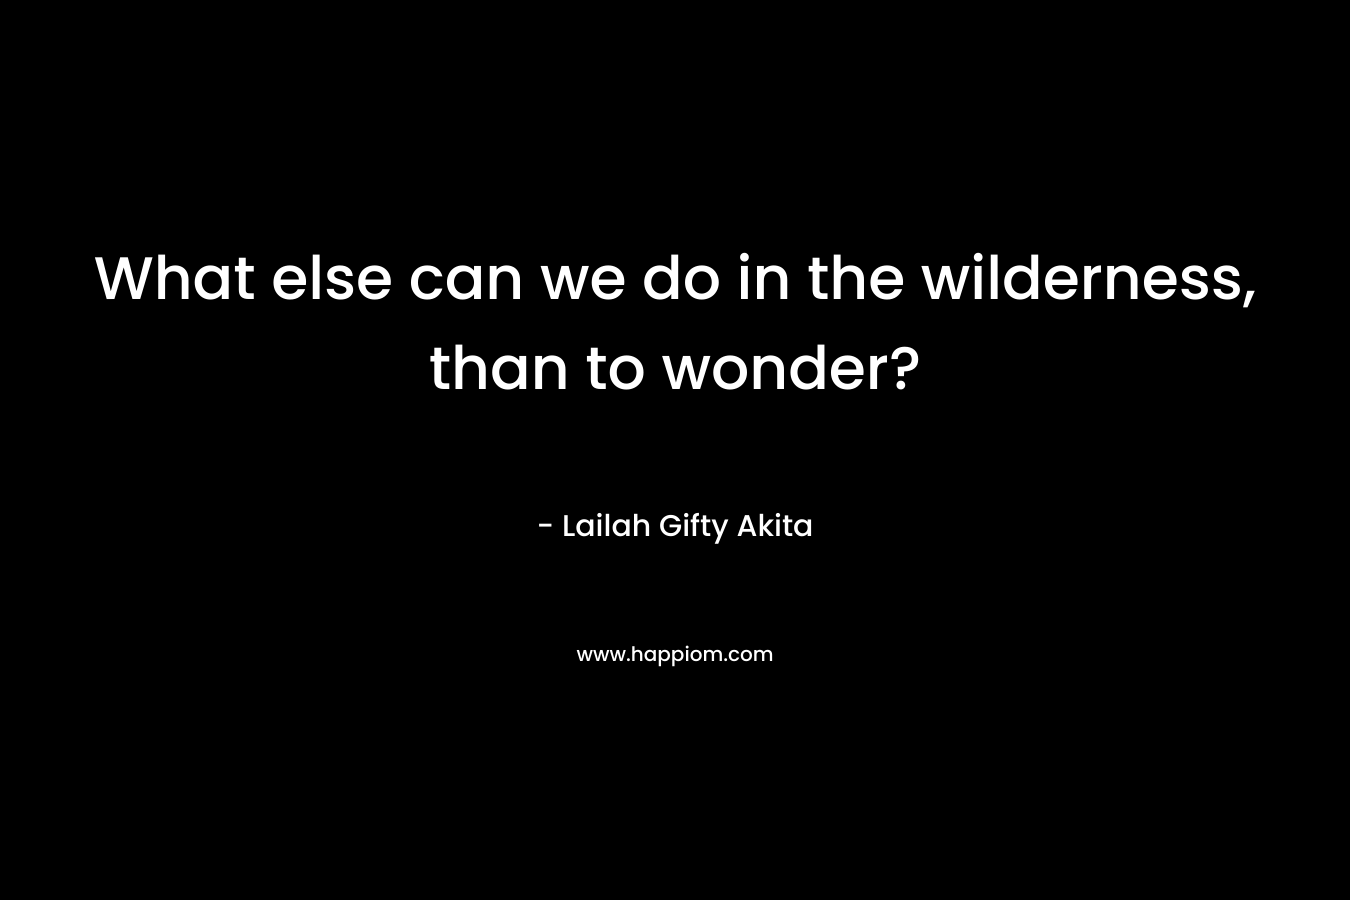 What else can we do in the wilderness, than to wonder?